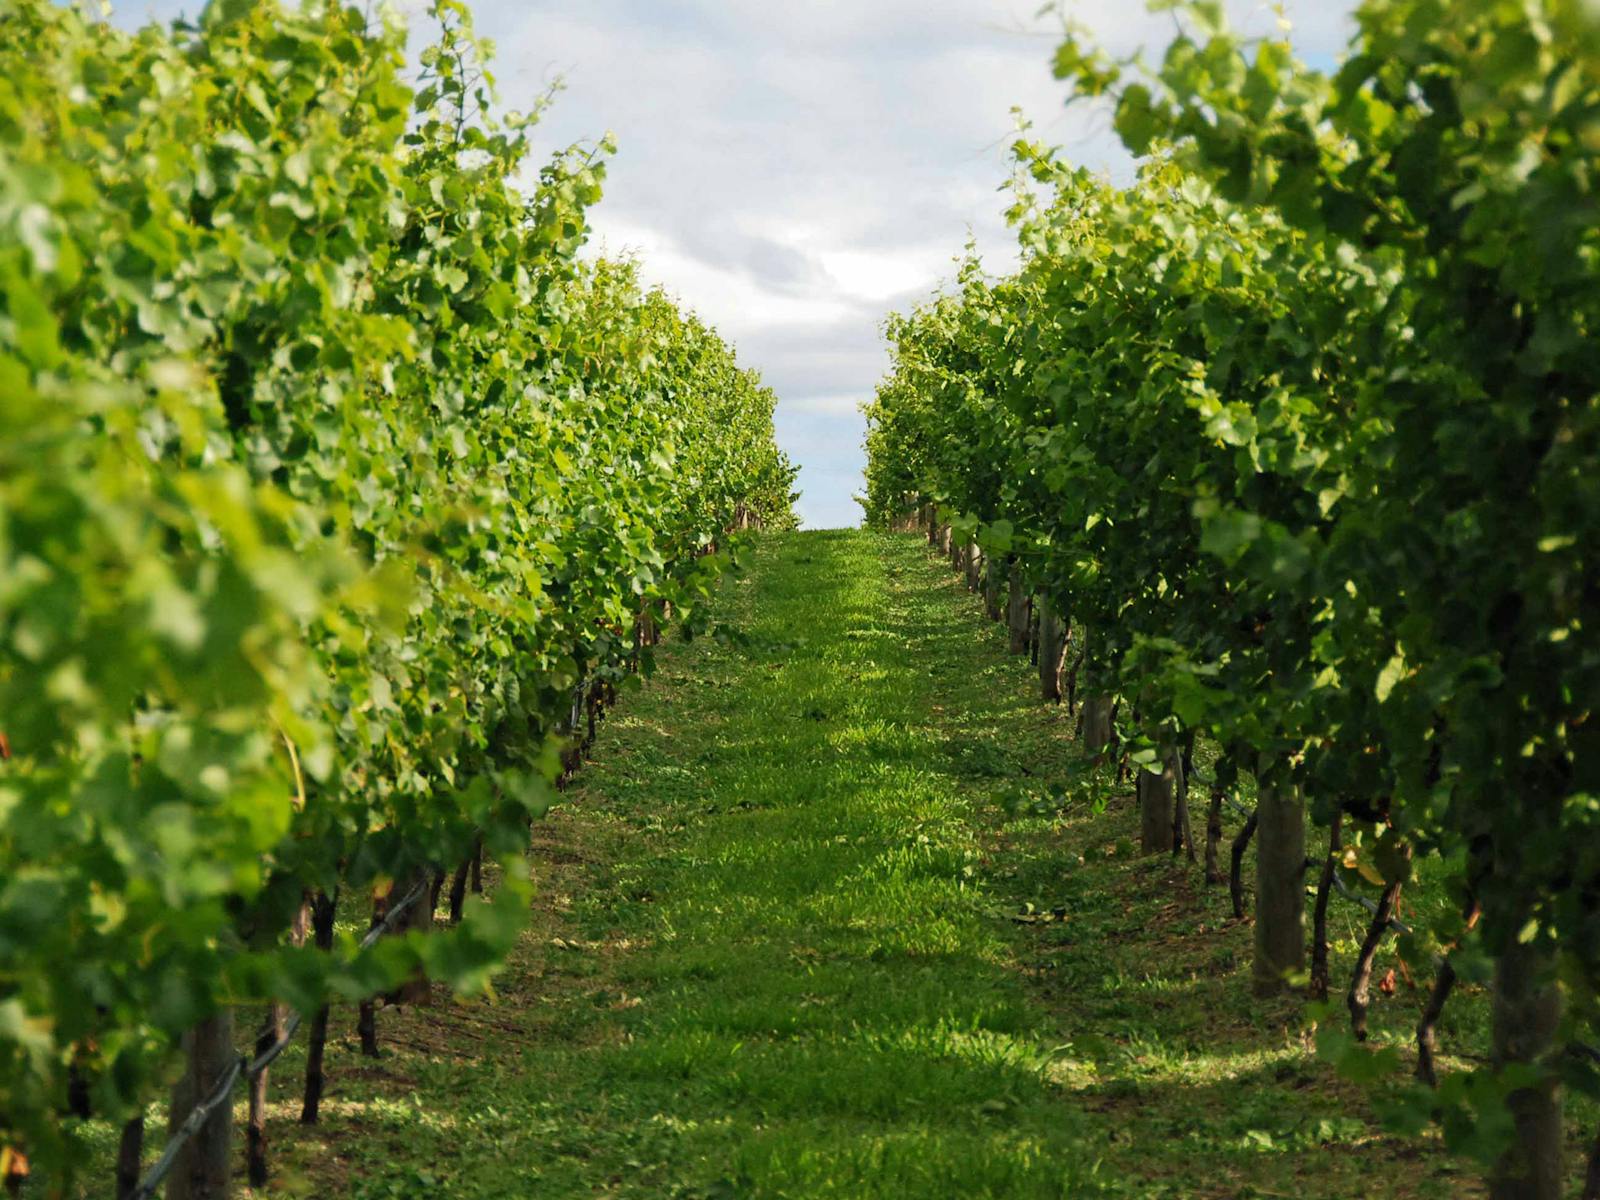 Bangor Wine in the Vines Tour - enjoy Bangor wine and local produce among the vines.